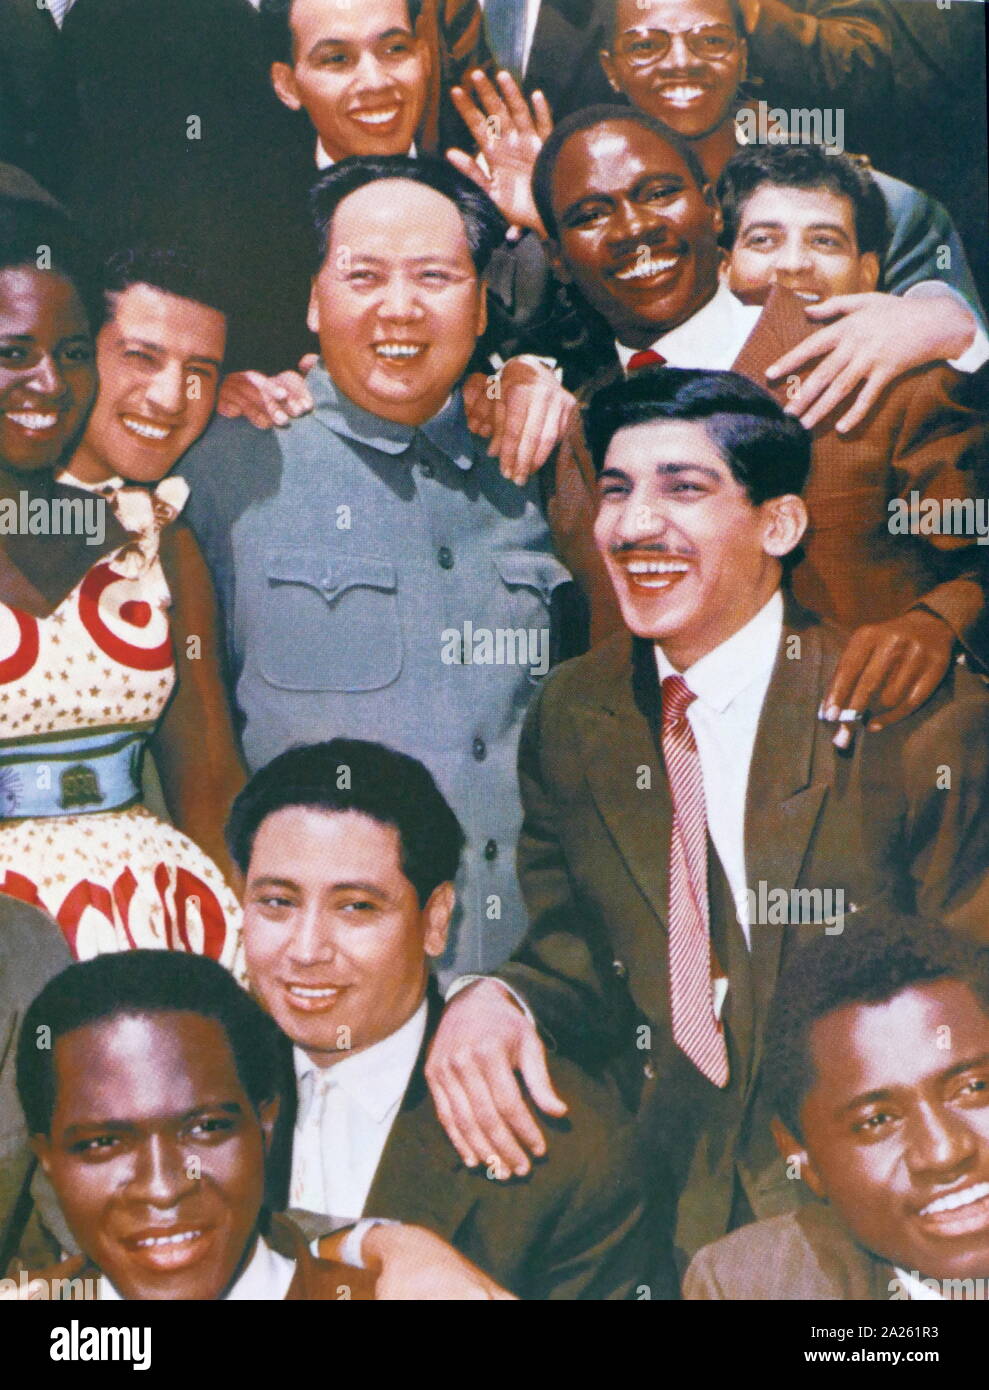 Chairman Mao with students from Asia, Africa and Latin America. (1959). Mao Zedong (1893 - 1976), also known as Chairman Mao, was a Chinese communist revolutionary who became the founding father of the People's Republic of China (PRC), which he ruled as the Chairman of the Communist Party of China from its establishment in 1949 until his death in 1976. Stock Photo